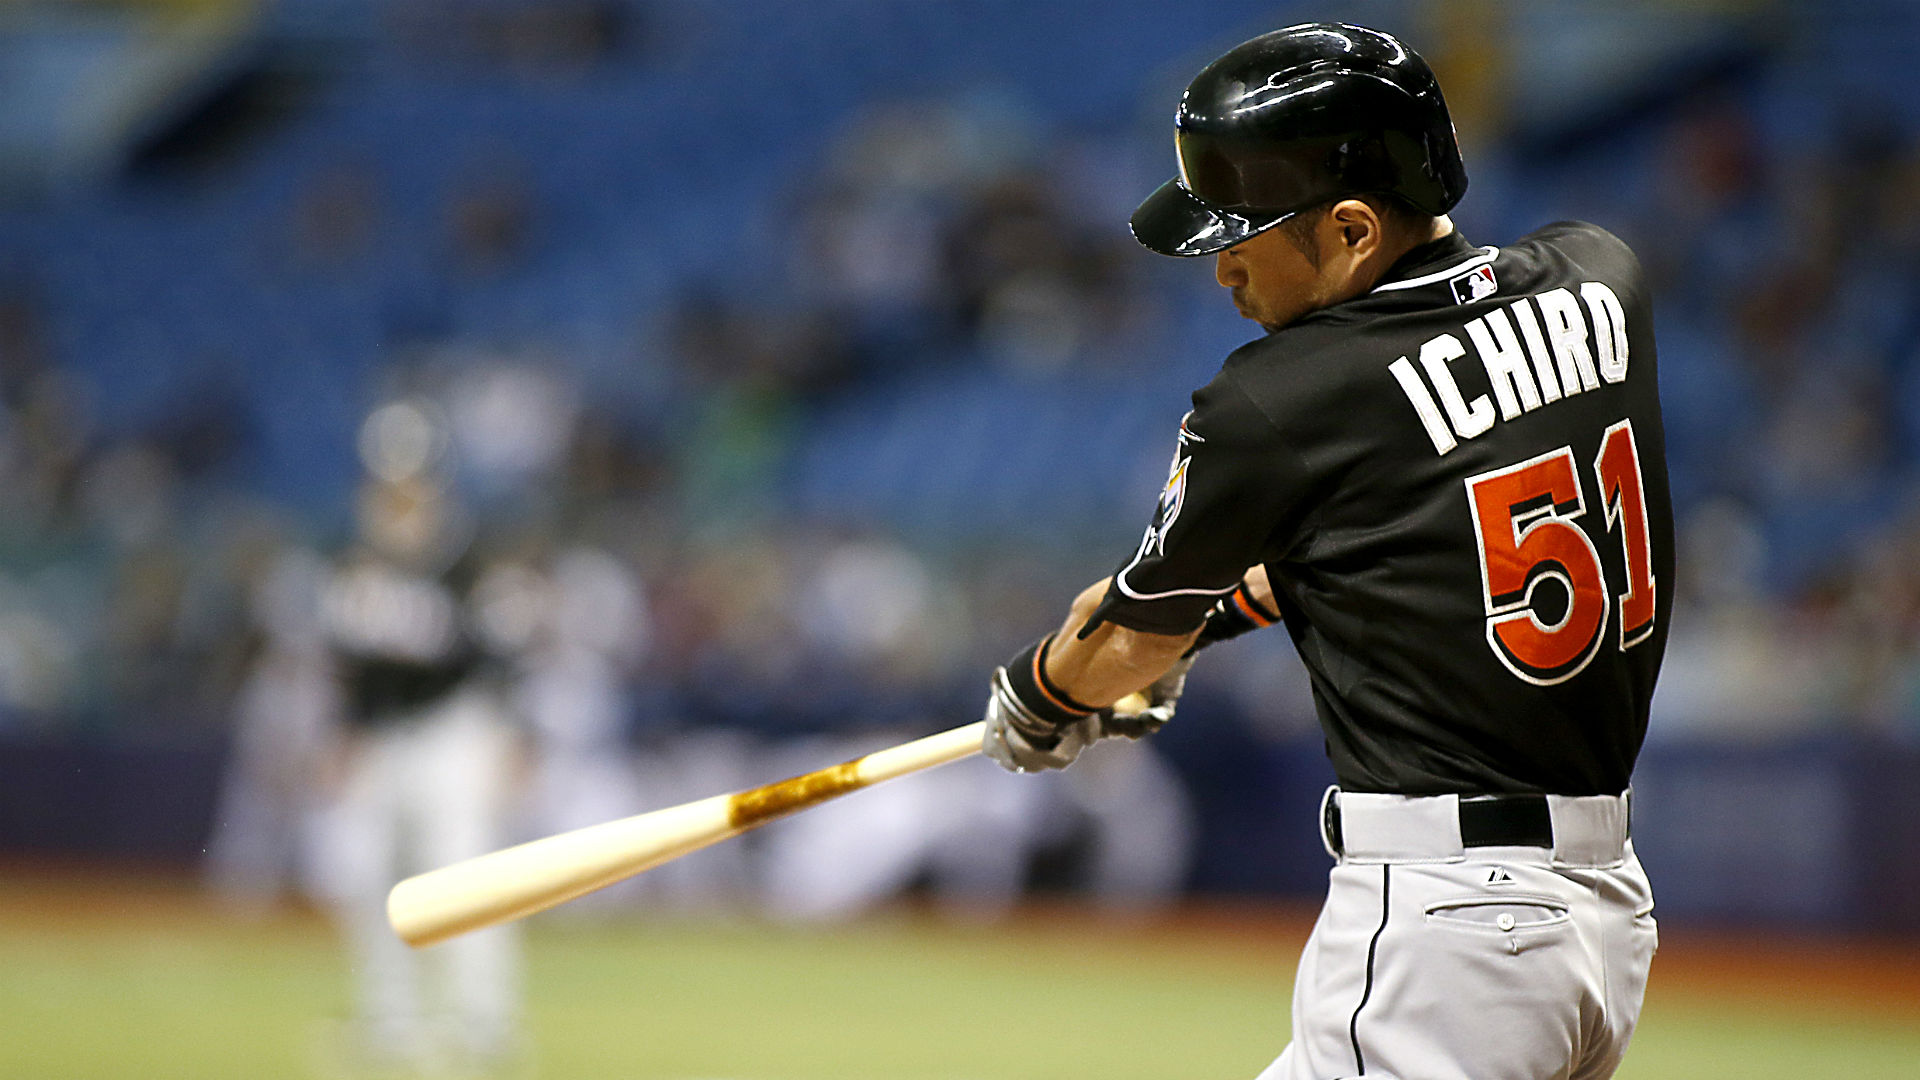 Everyone loves Ichiro, but please cool it with the ‘hit king’ talk | MLB ...1920 x 1080